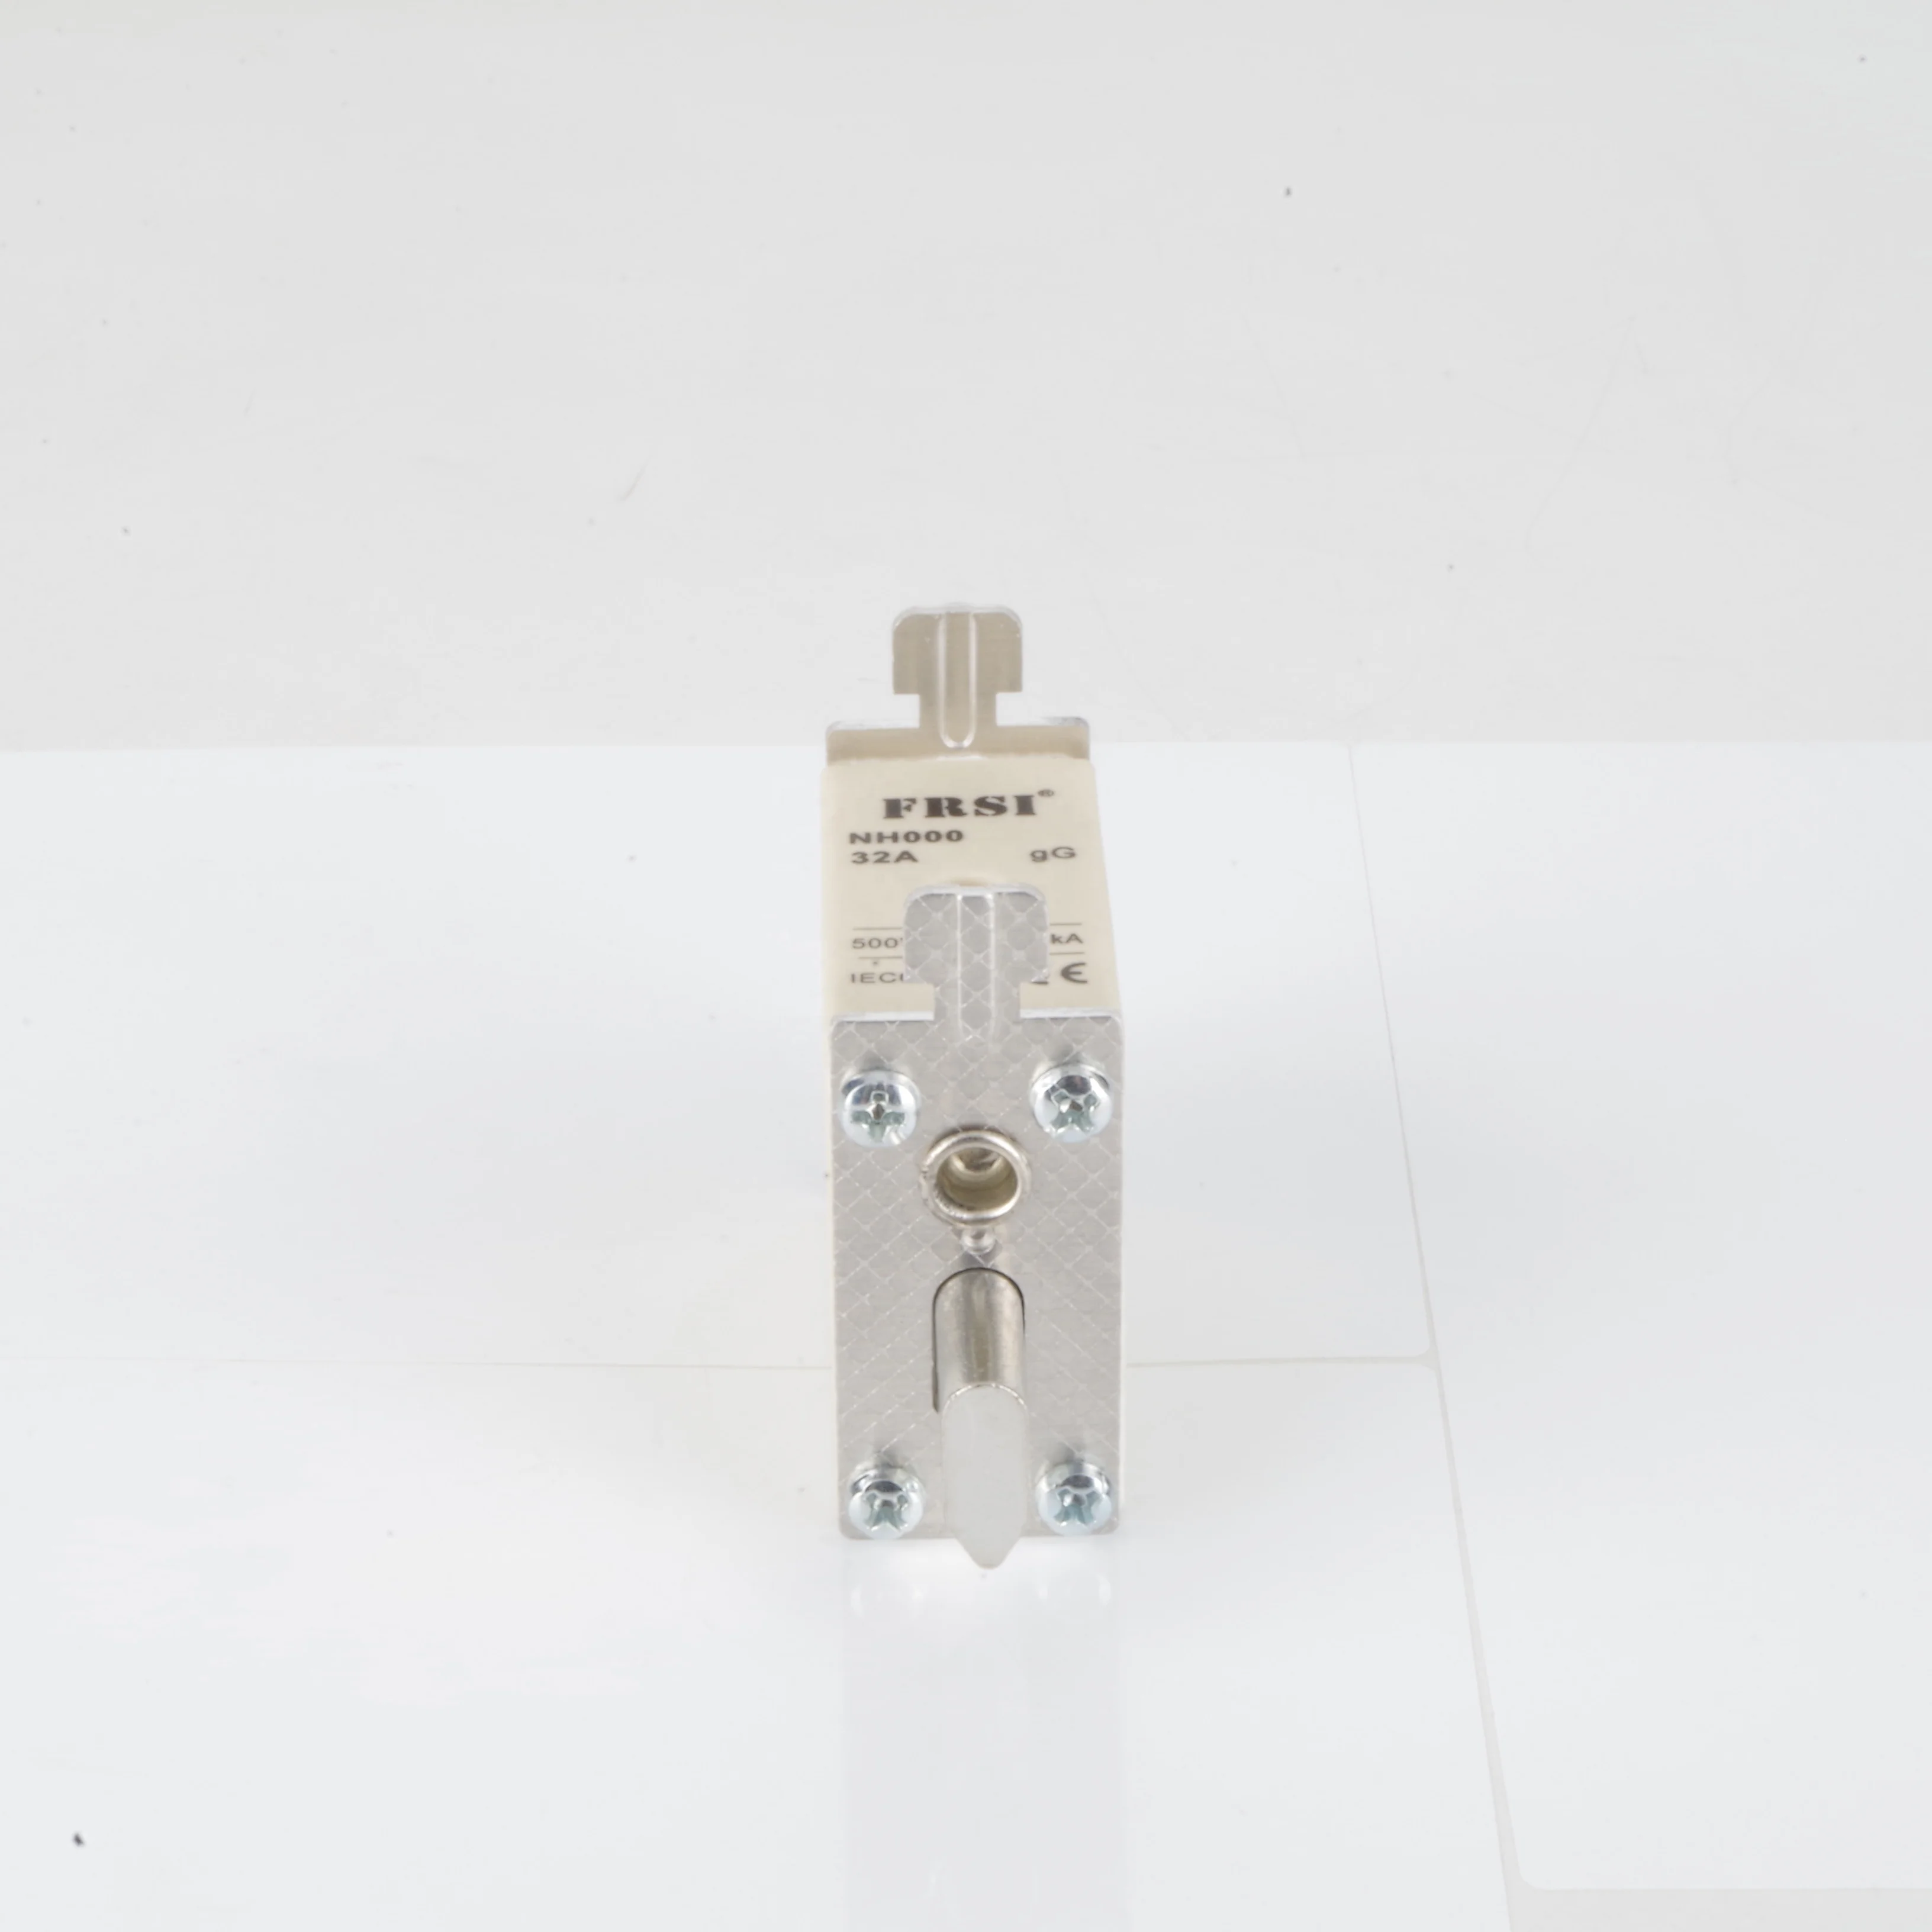 32A NH000 square blade ceramic fuse with Indicator fuse